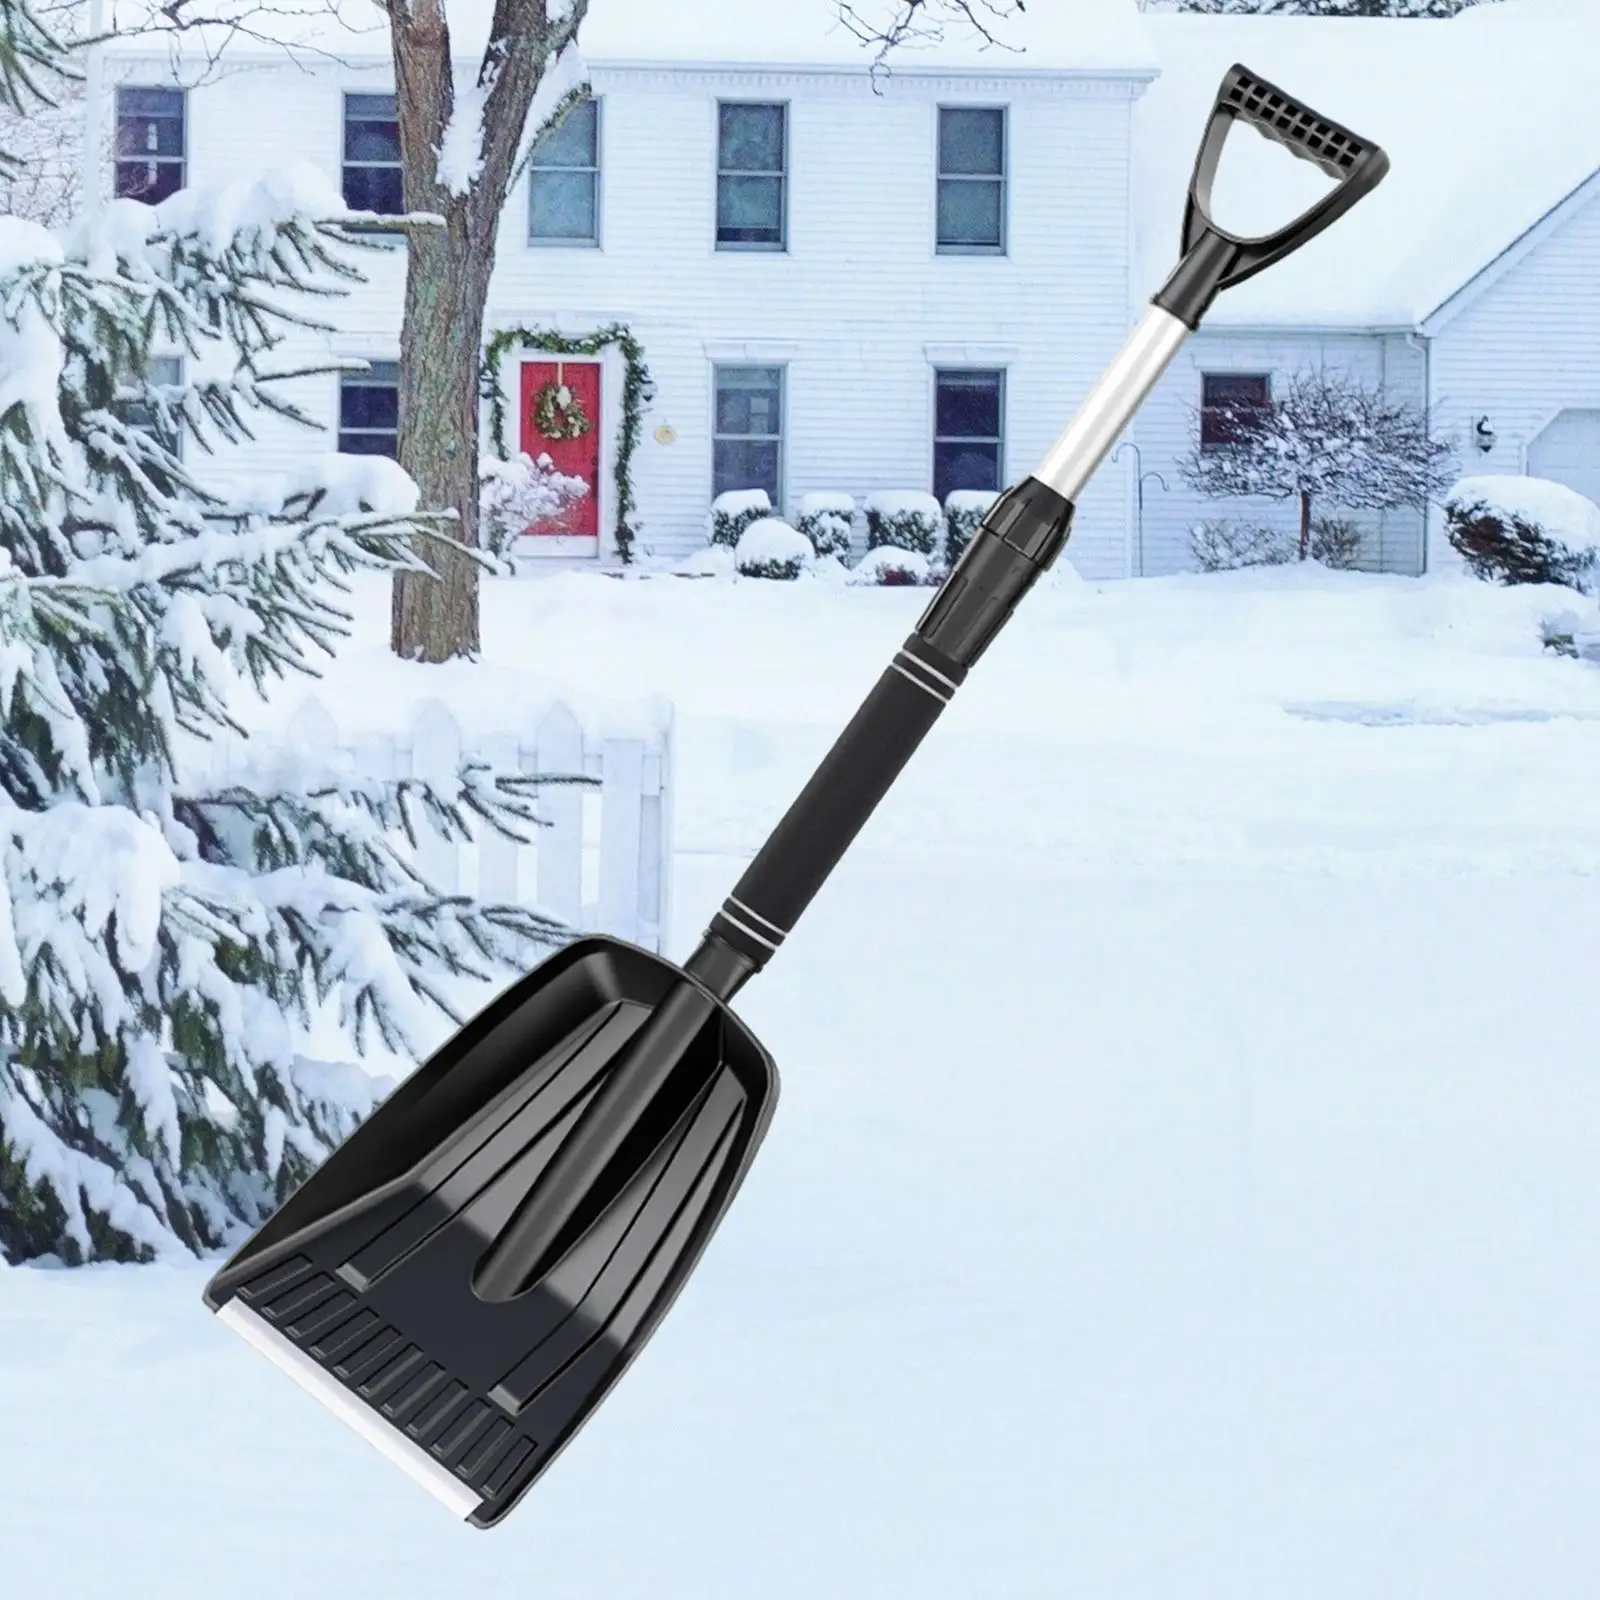 Snow Shovel Portable Winter Car Accessories Window Cleaning Multifunctional Removable for Garden Outdoor Suvs Trucks Beach